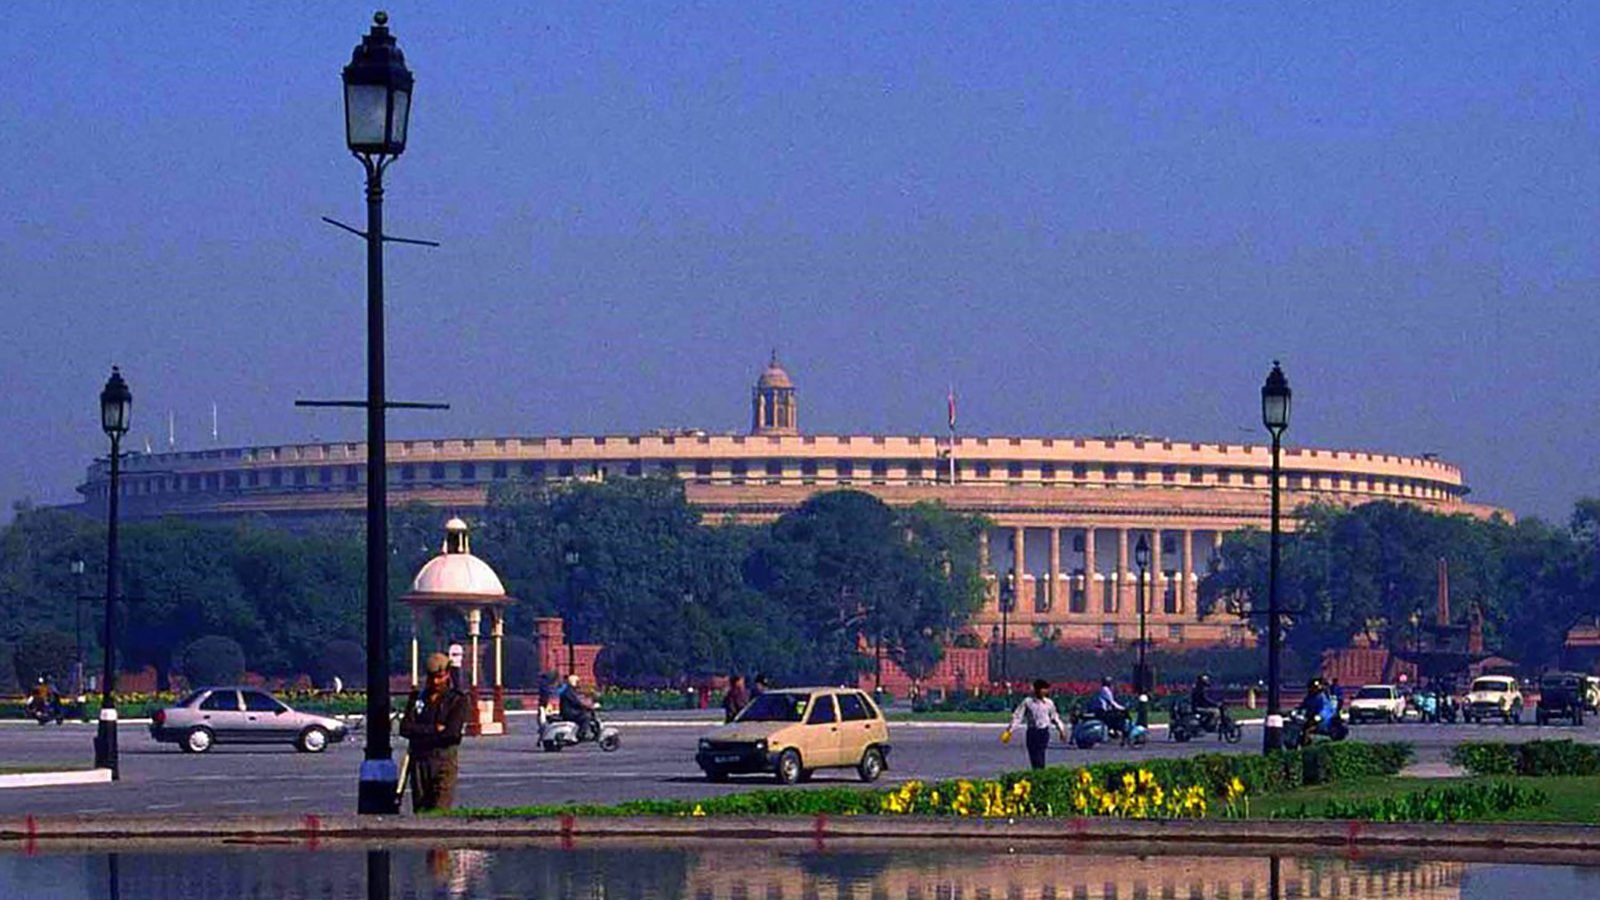 Disruptions in the Indian Parliament